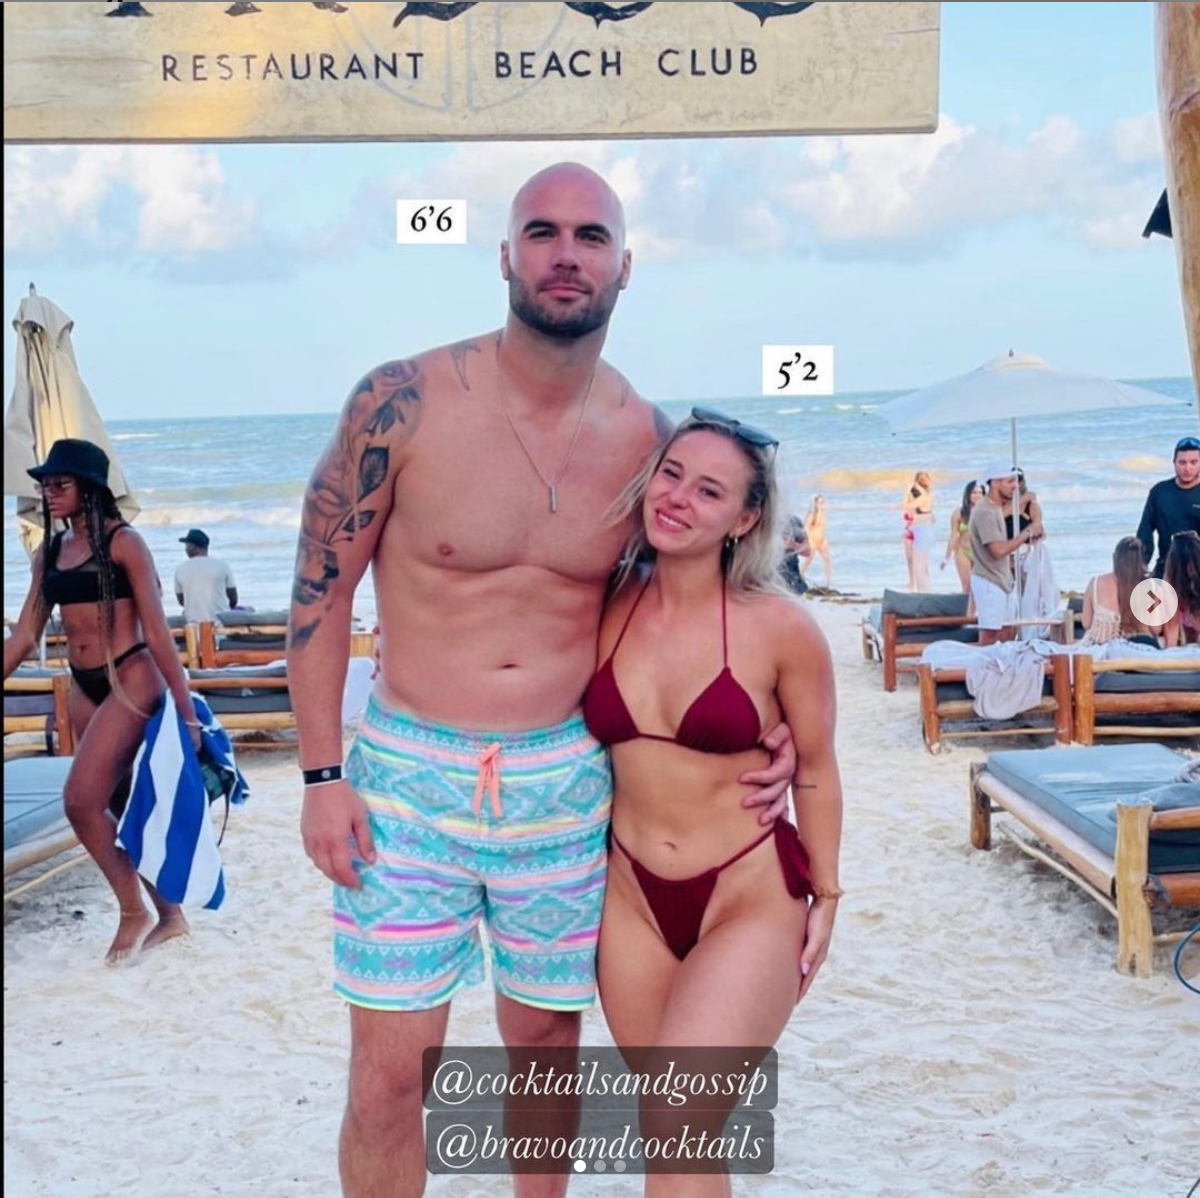 Mike Caussin with a mystery woman on the beach